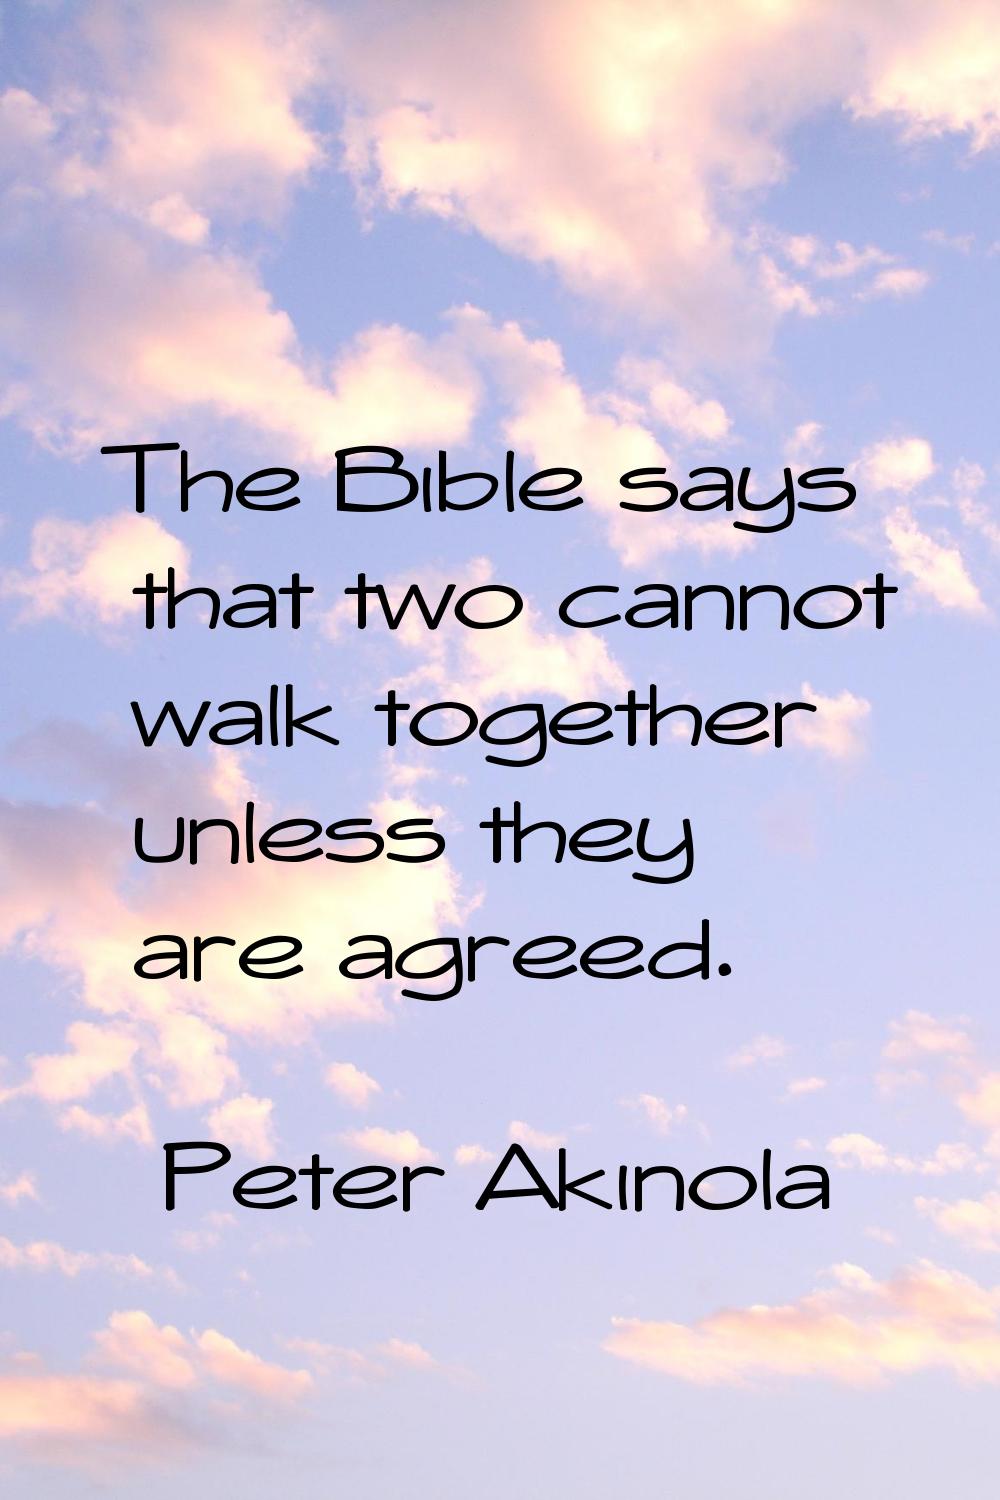 The Bible says that two cannot walk together unless they are agreed.